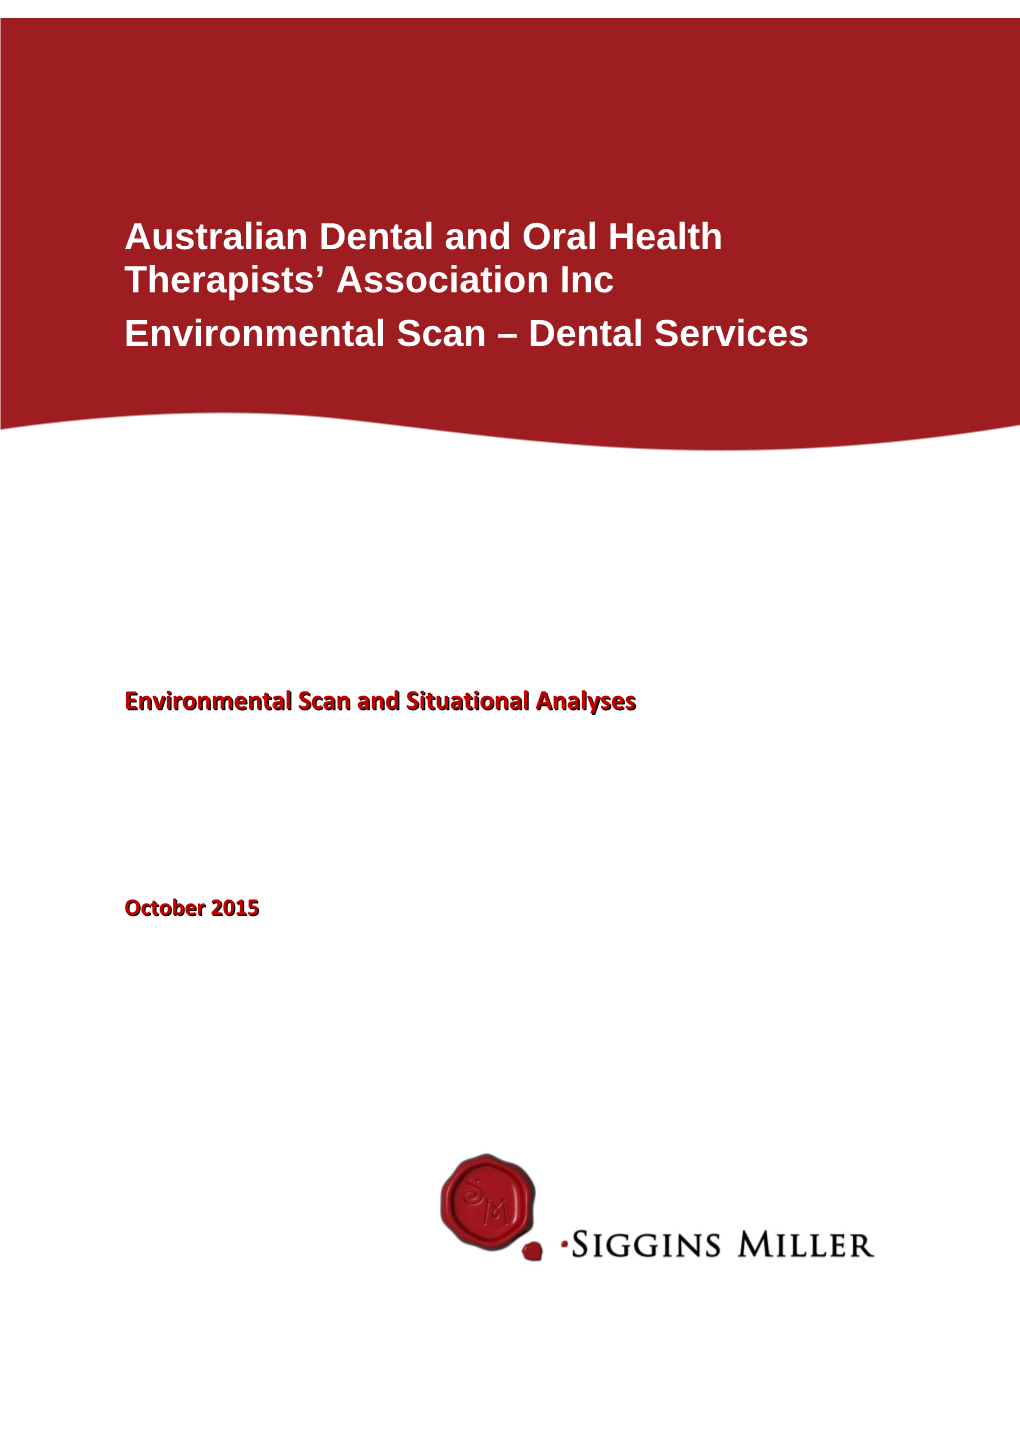 Submission 99 - Attachment: Environmental Scan and Situational Analyses - Australian Dental